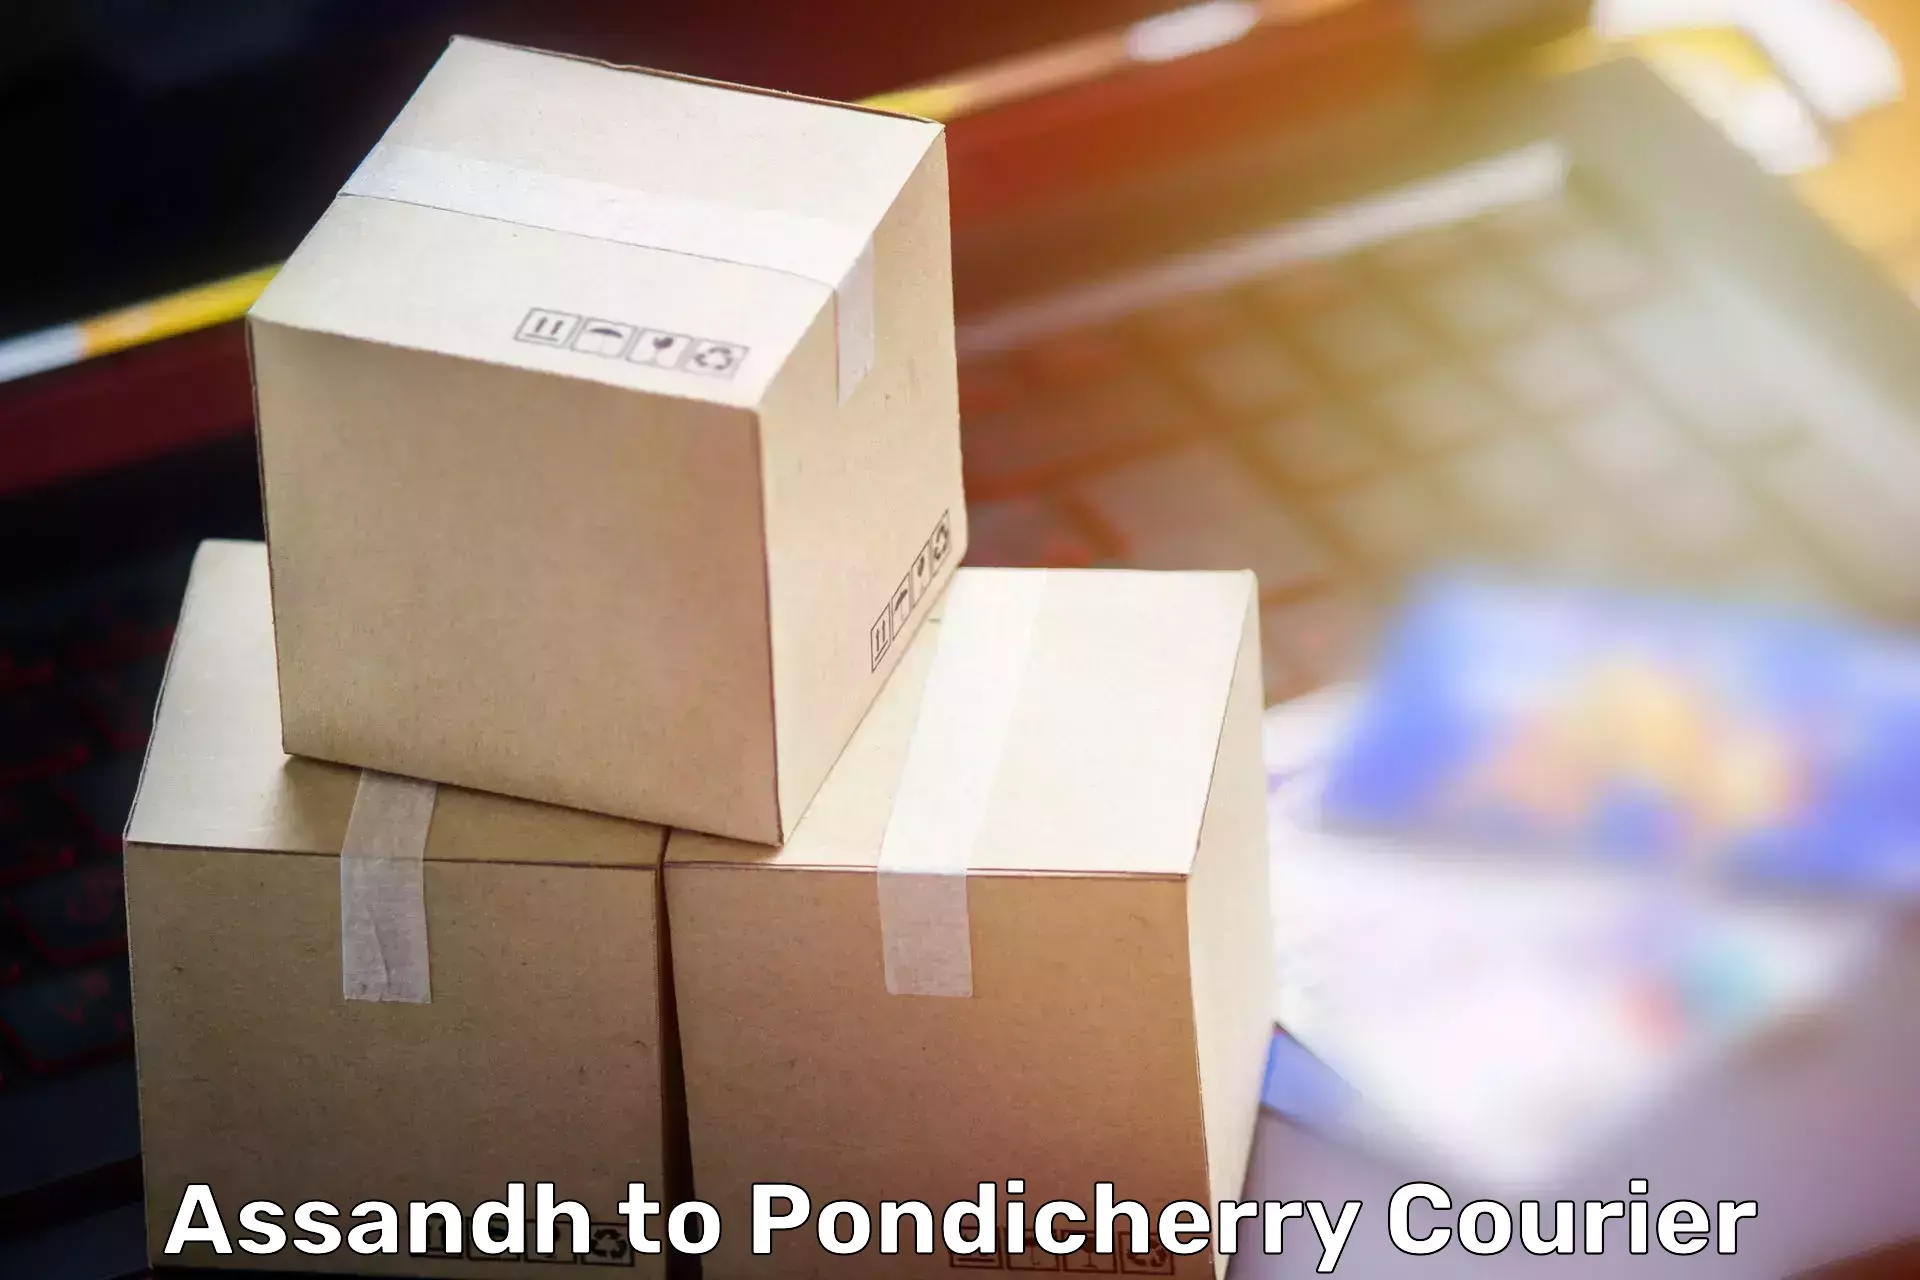 Moving and packing experts Assandh to Pondicherry